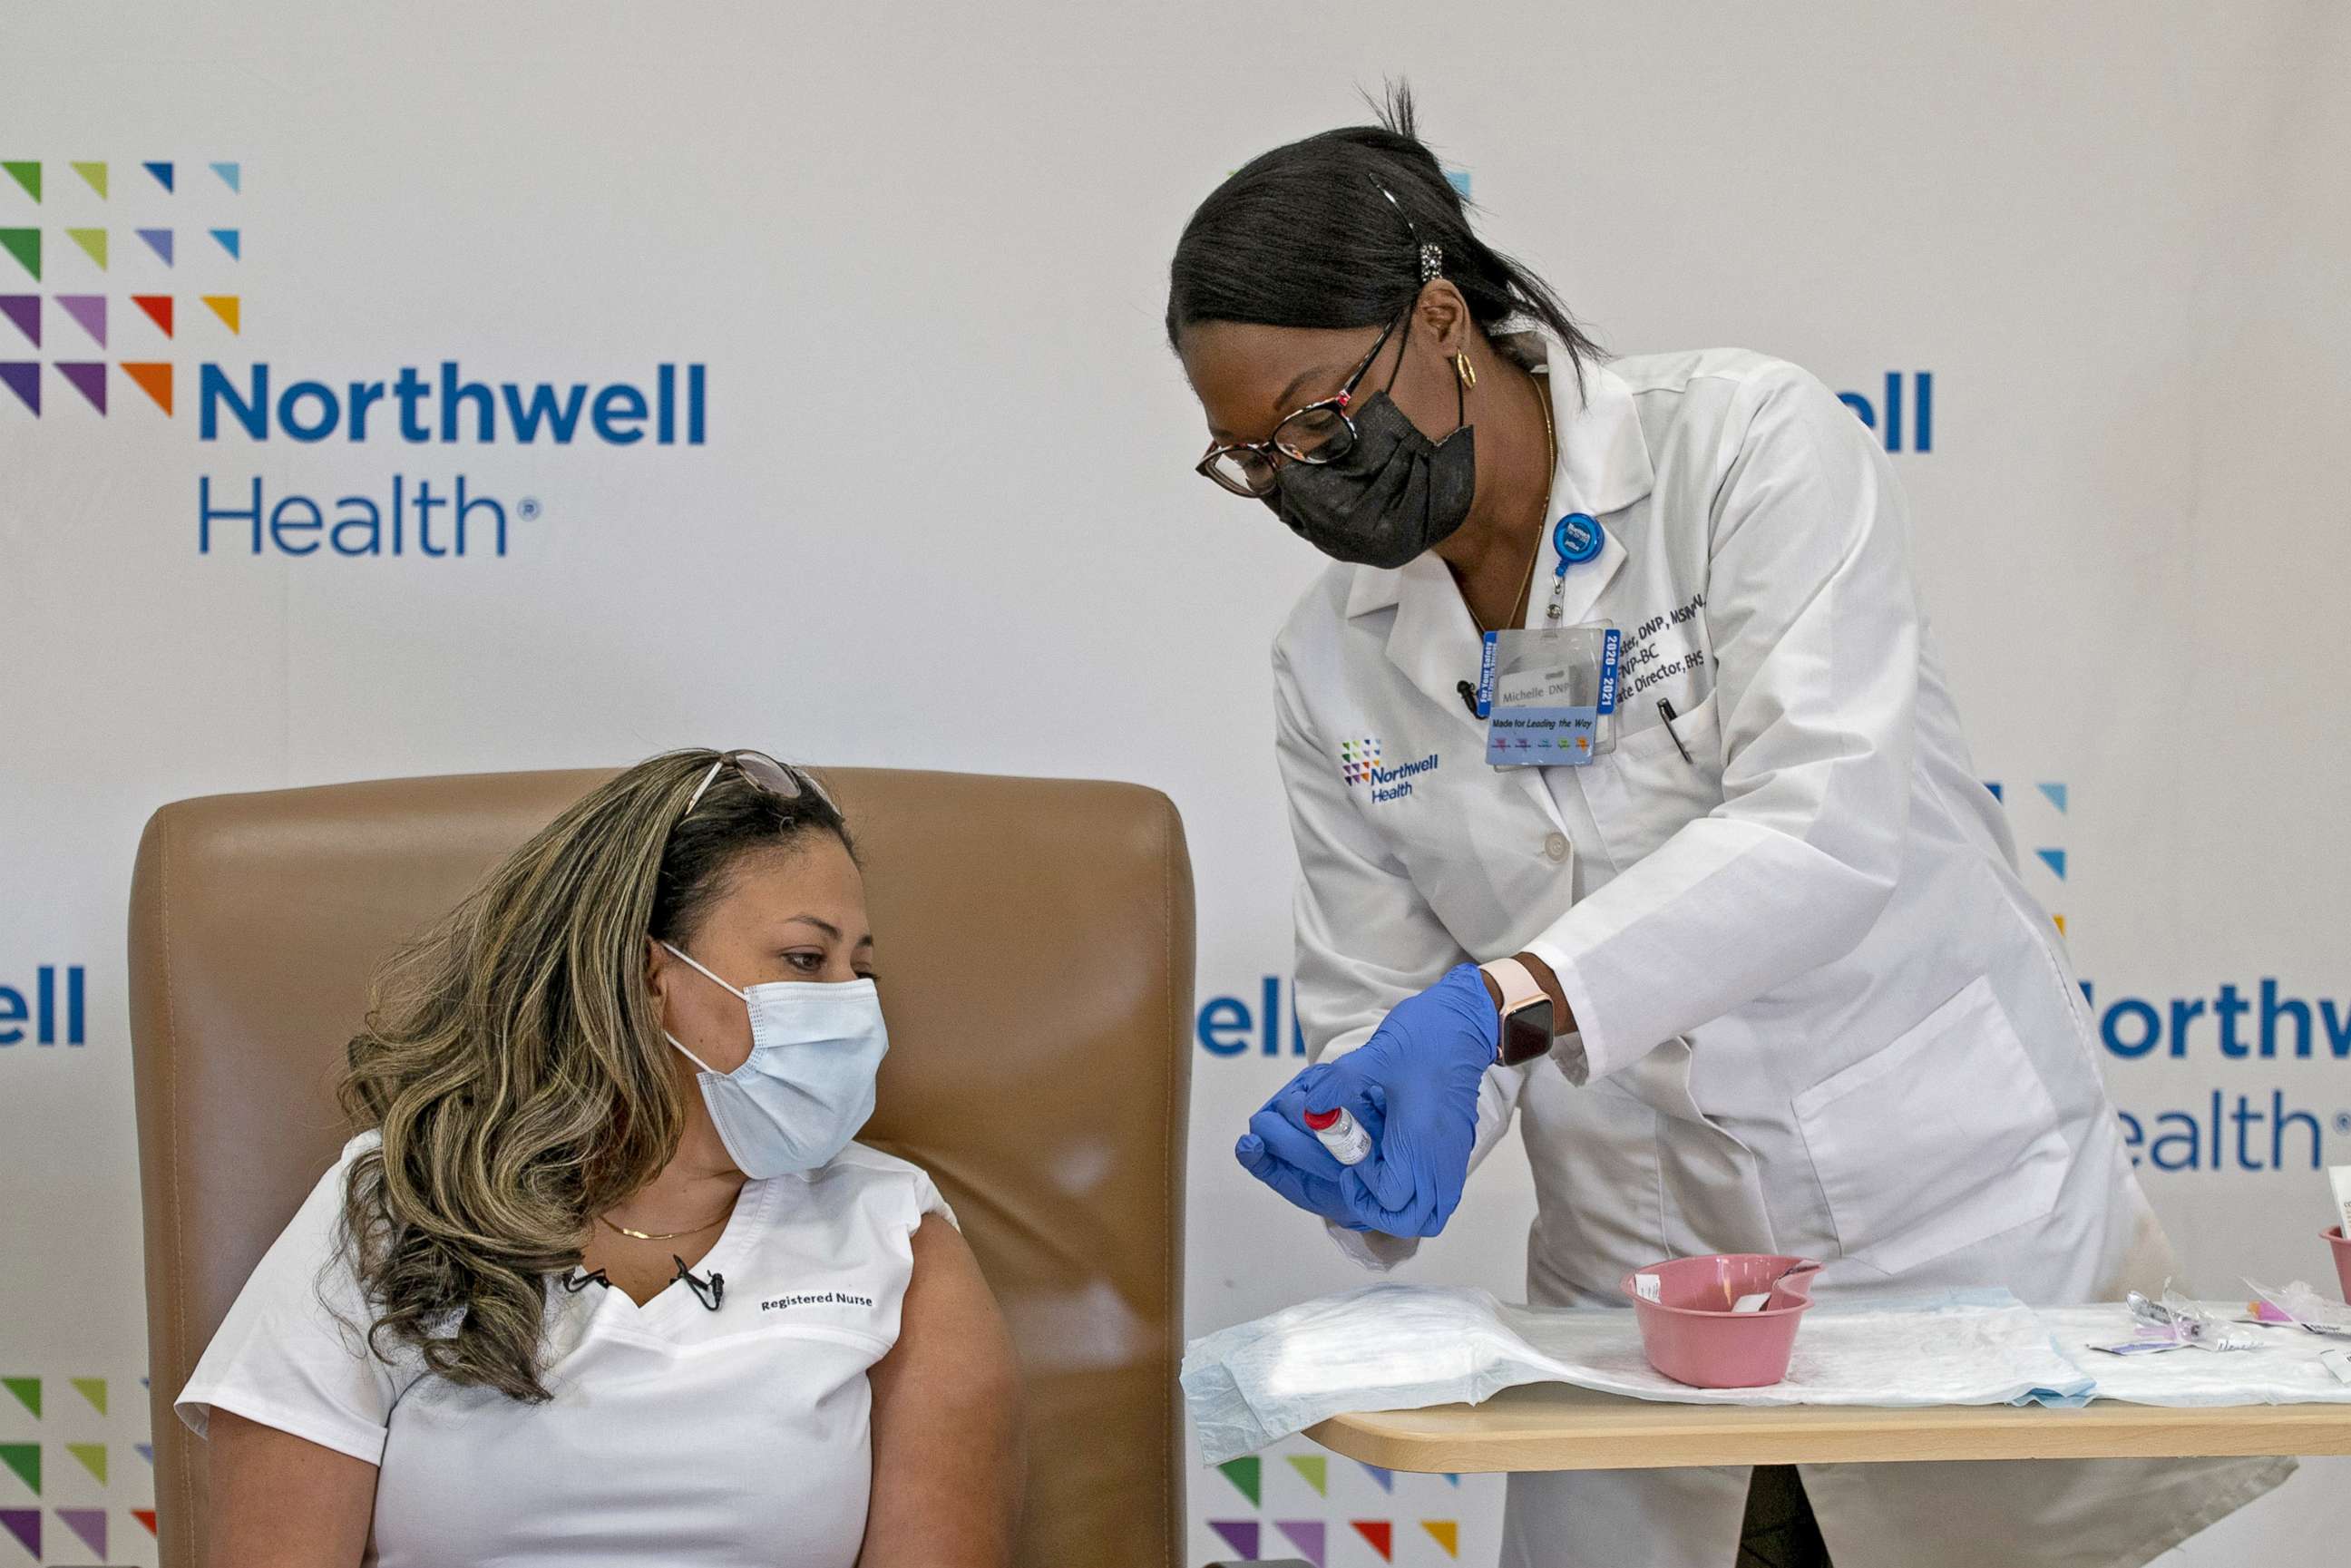 PHOTO: Dr. Michelle Chester prepares to administer the Moderna vaccine to registered nurse Arlene Ramirez, the first frontline worker to be inmunized at Long Island Jewish Valley Stream hospital in Valley Stream, N.Y., Dec. 21, 2020.